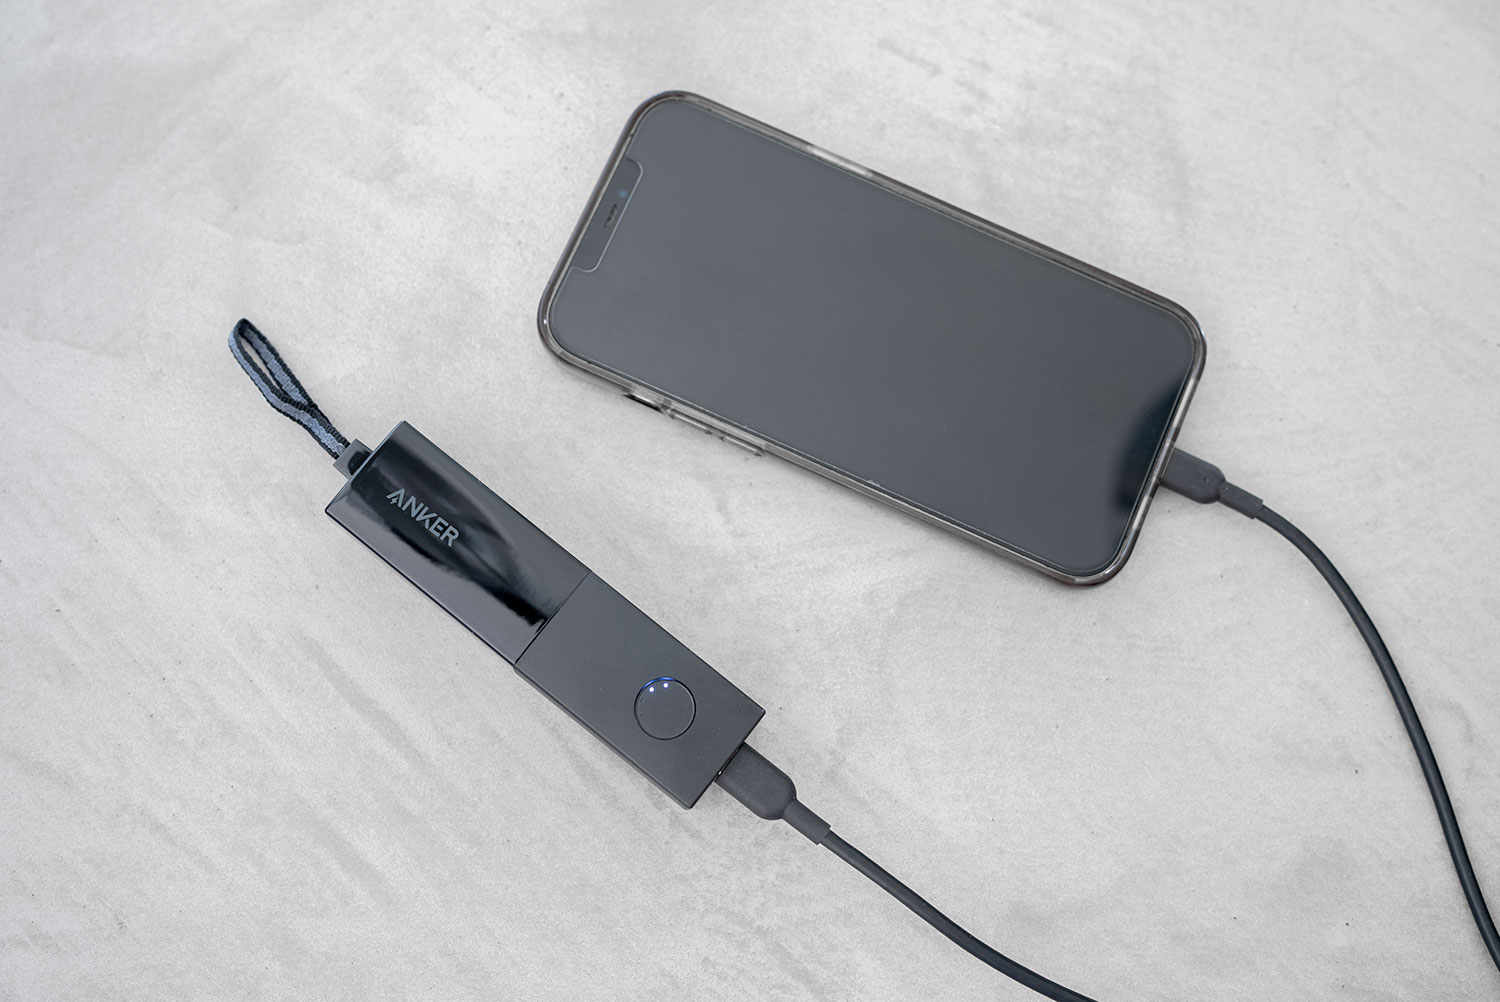 Anker 511 Power Bank　使用イメージ